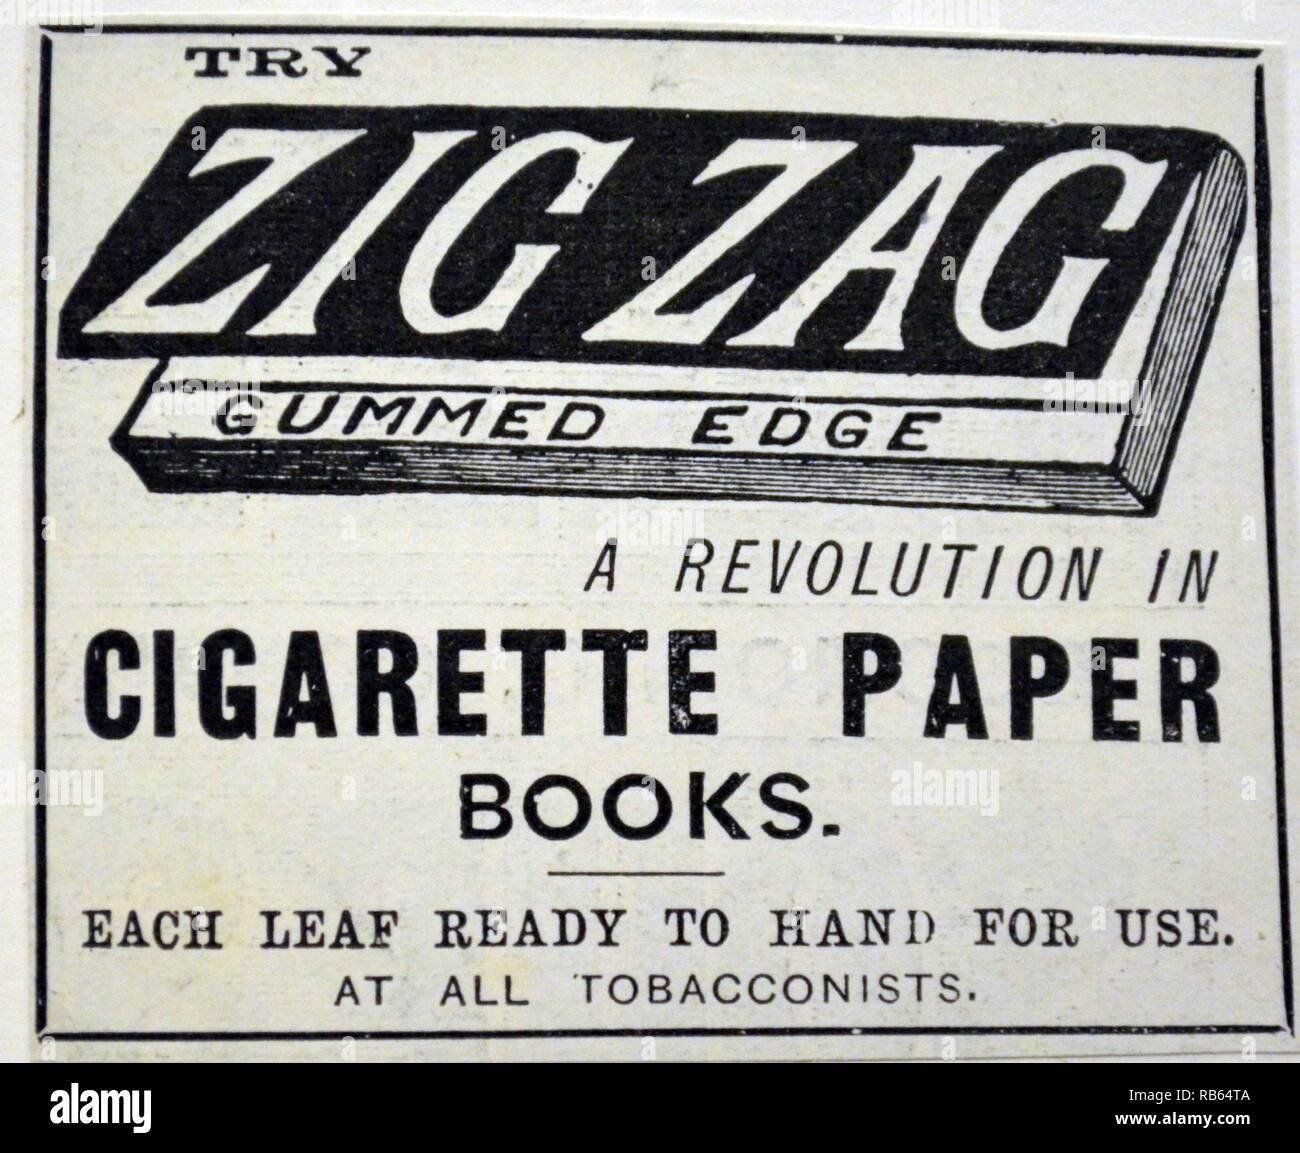 Advertisement for Zig-Zag cigarette papers from ''The Illustrated London News'', London, 1900. Stock Photo